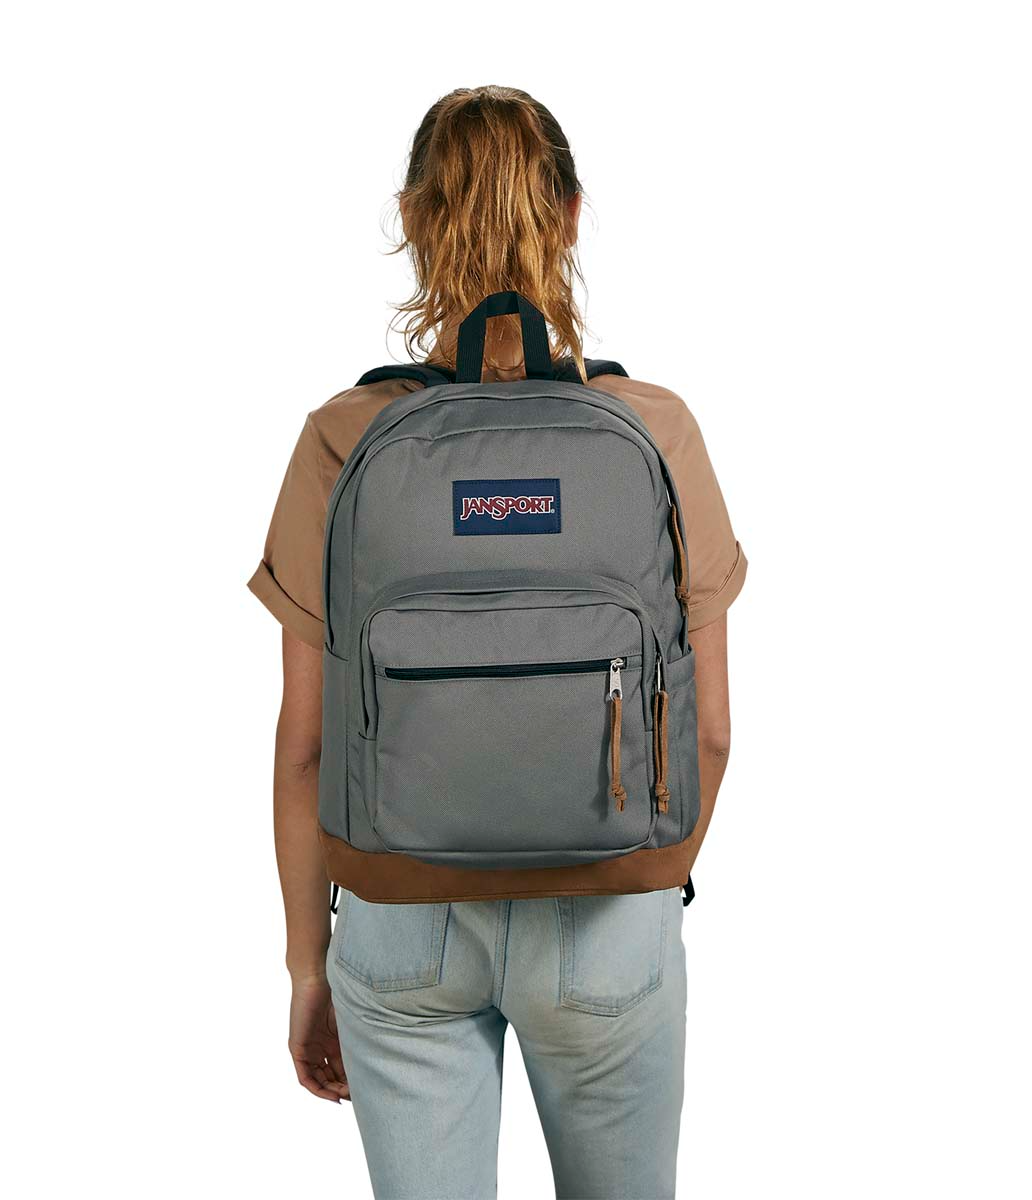 JANSPORT RIGHT PACK GRAPHITE GREY